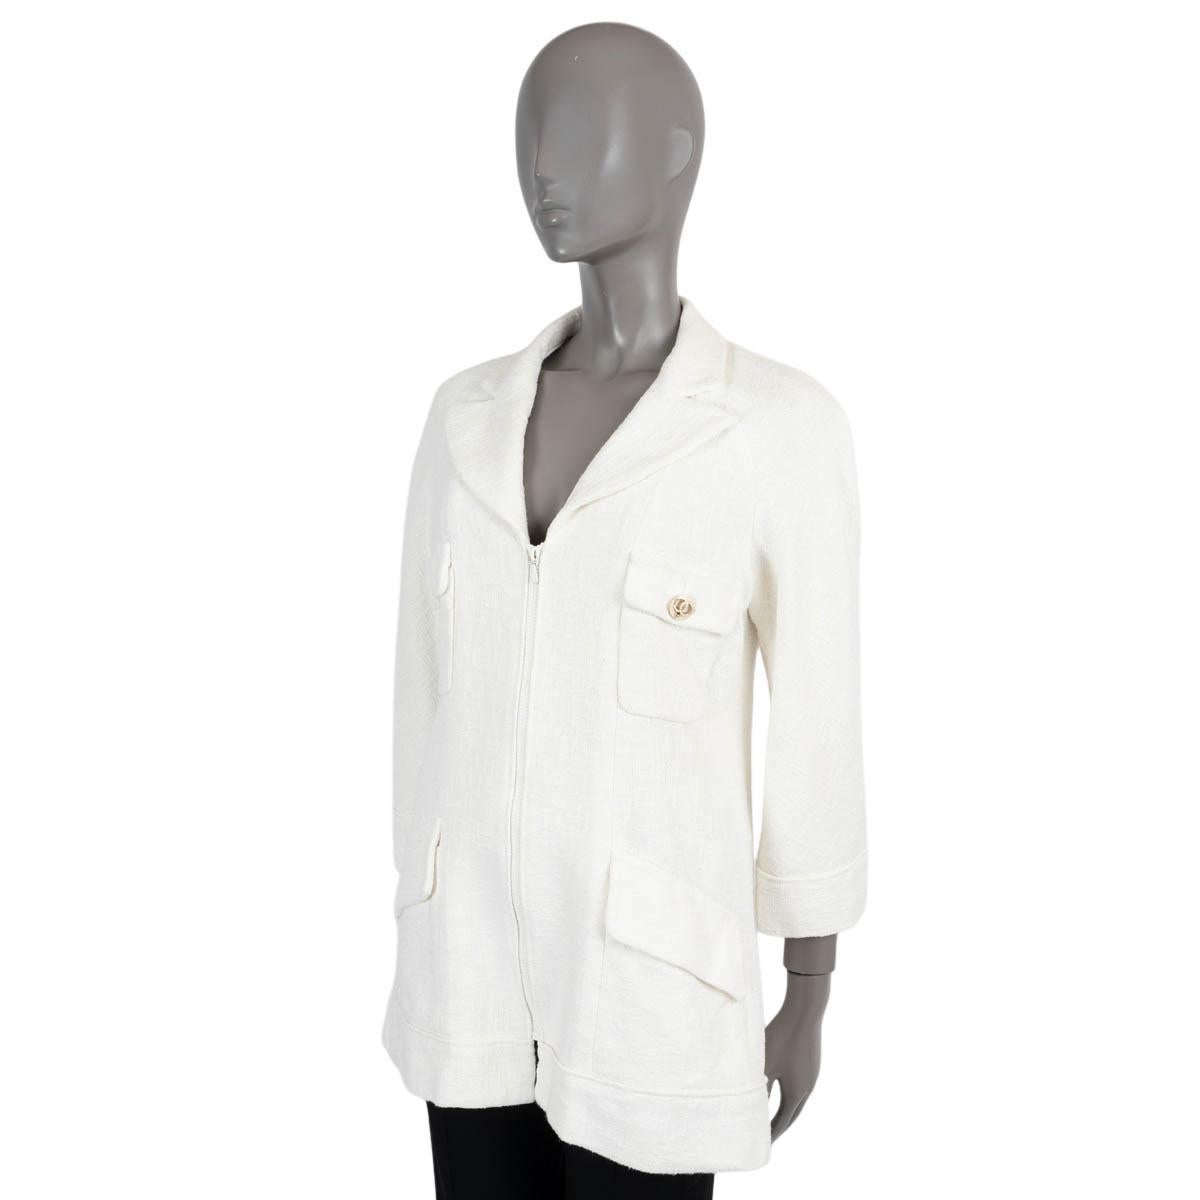 100% authentic Chanel tweed jacket in off-white cotton (100%). Features peak lapes, raglan sleeves, two buttoned flap pockets at the chest, two flap pockets at the waist and two zippered pleats on the back sides. Closes with a zipper on the front